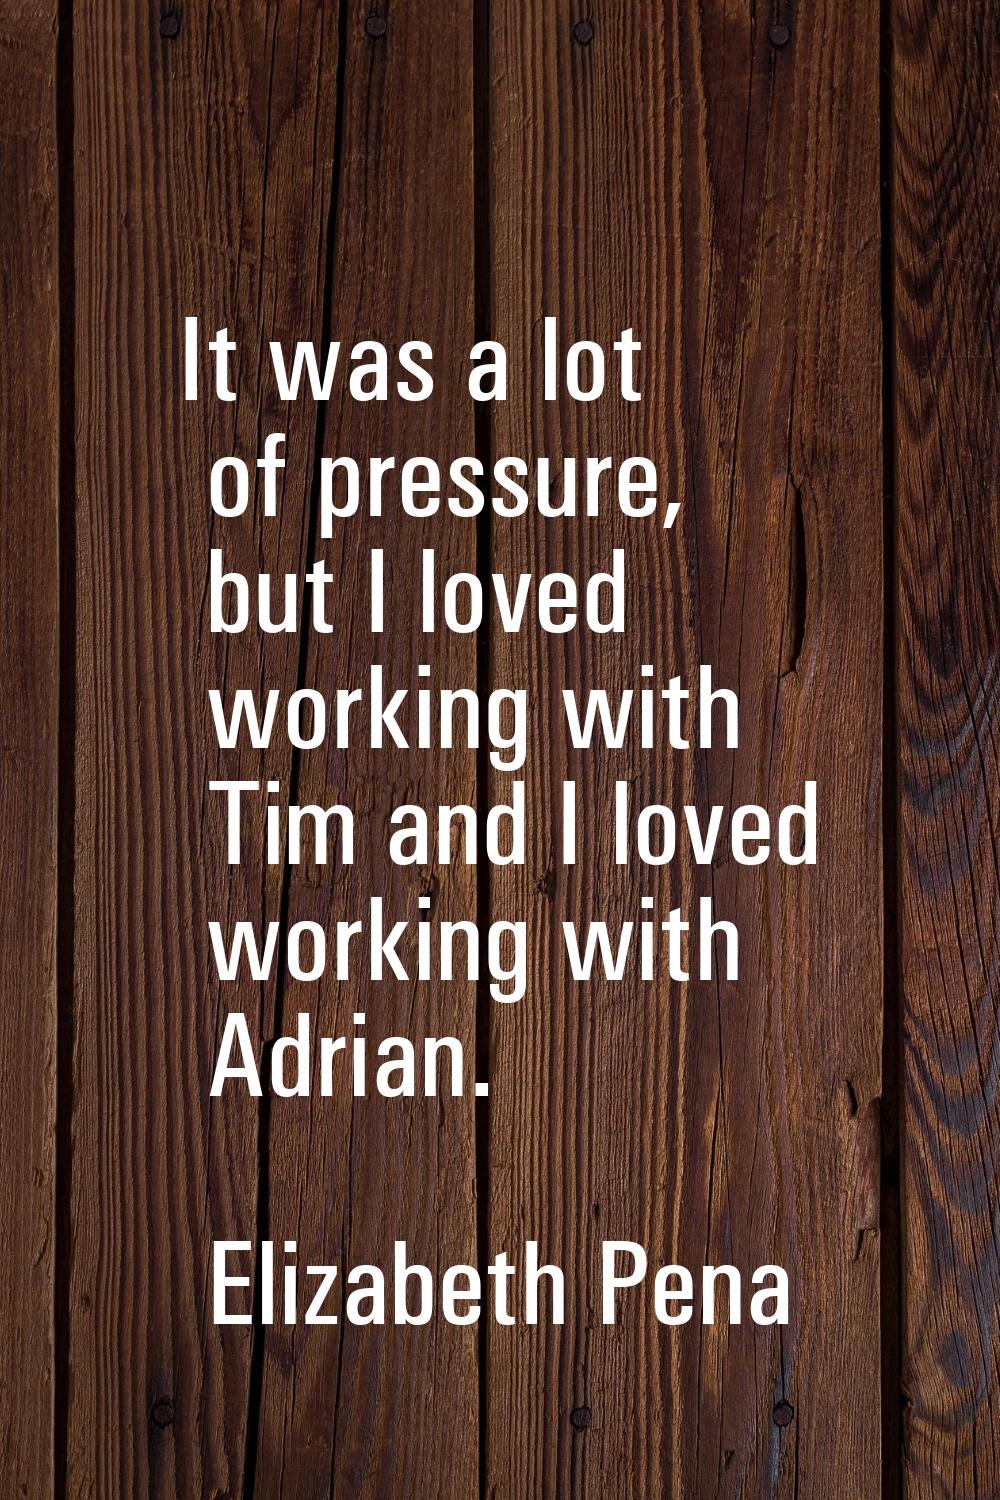 It was a lot of pressure, but I loved working with Tim and I loved working with Adrian.